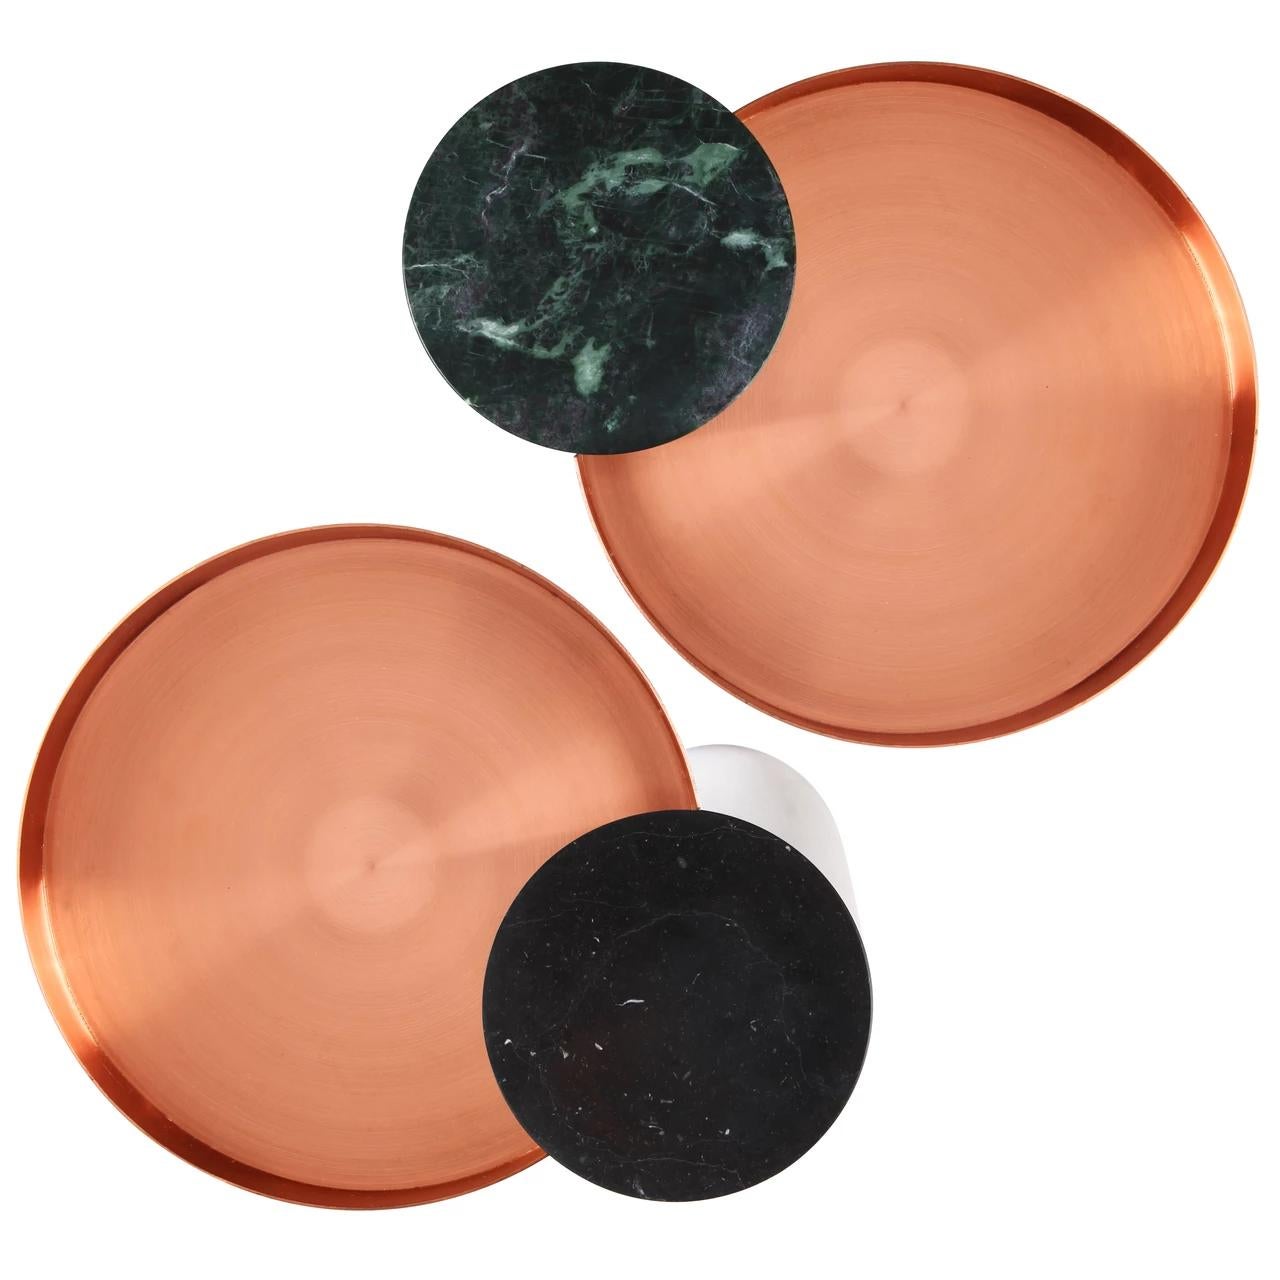 Pair of contemporary Gueridons, Sebastian Herkner

The salute table exists in 3 sizes, 3 different marbles for the column and 4 different finishes for the tray for a virtually endless number of configurations. In addition, Salute can be made